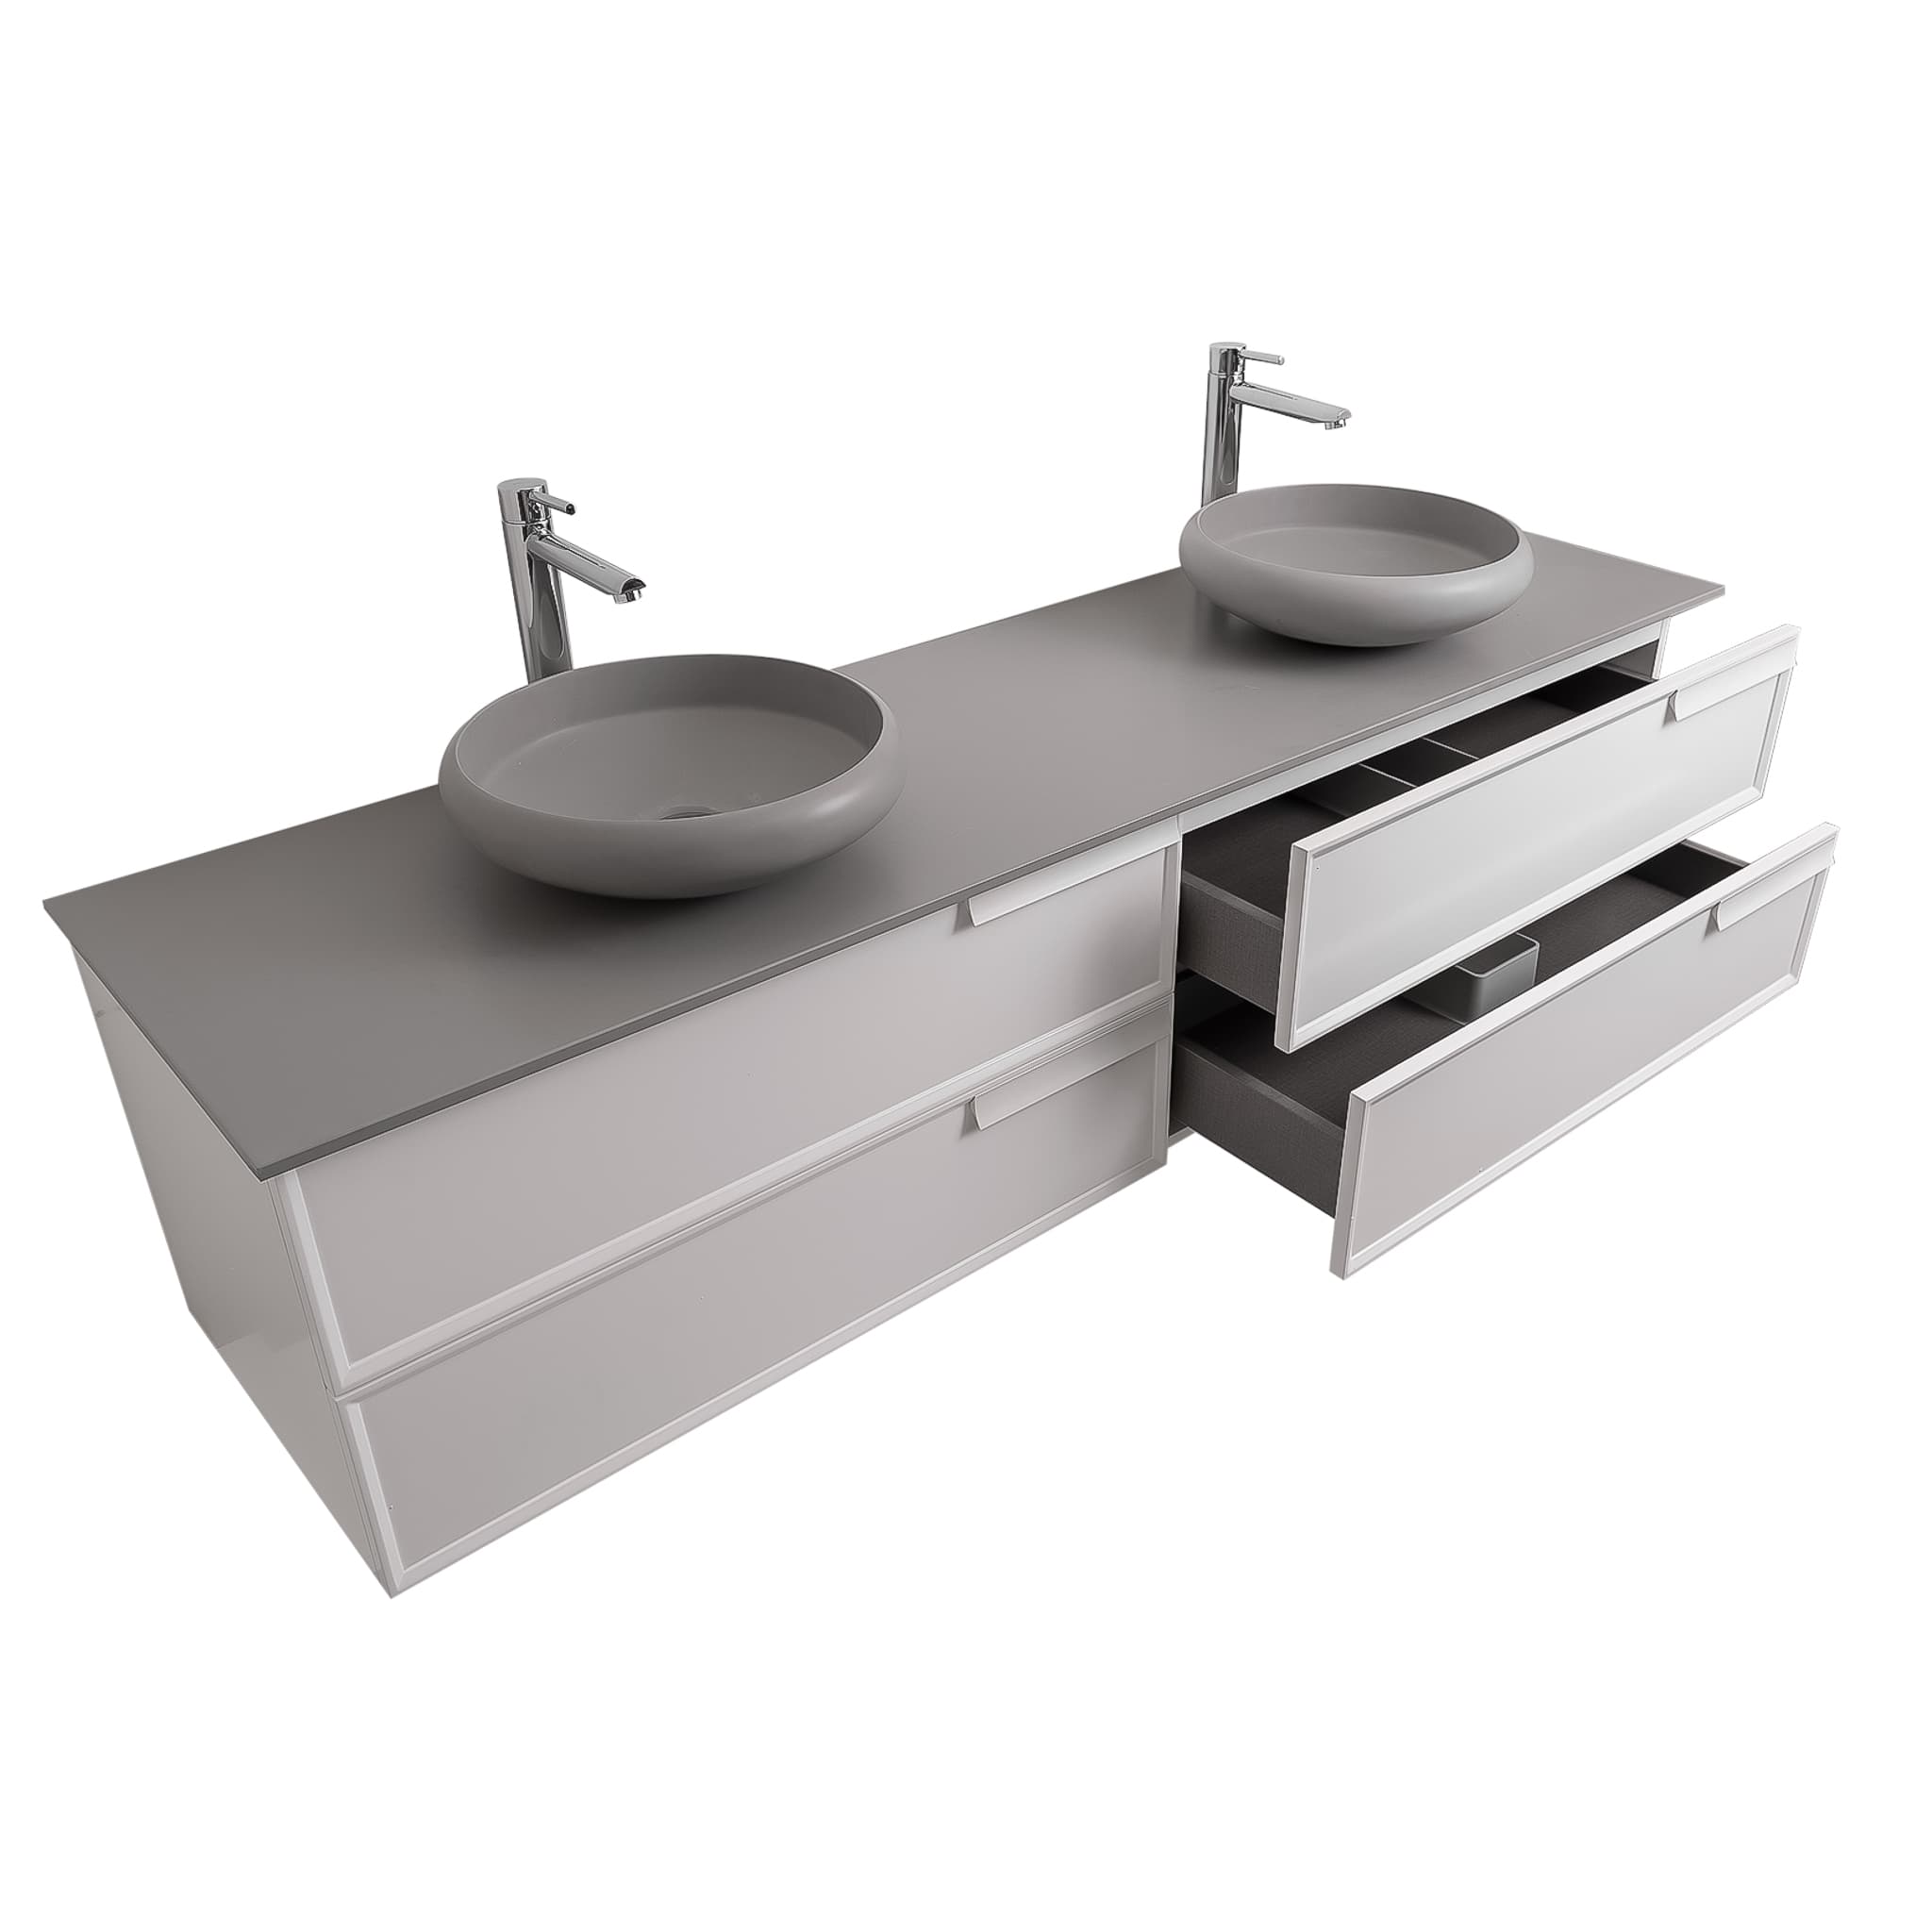 Garda 72 Matte White Cabinet, Solid Surface Flat Grey Counter and Two Round Solid Surface Grey Basin 1153, Wall Mounted Modern Vanity Set